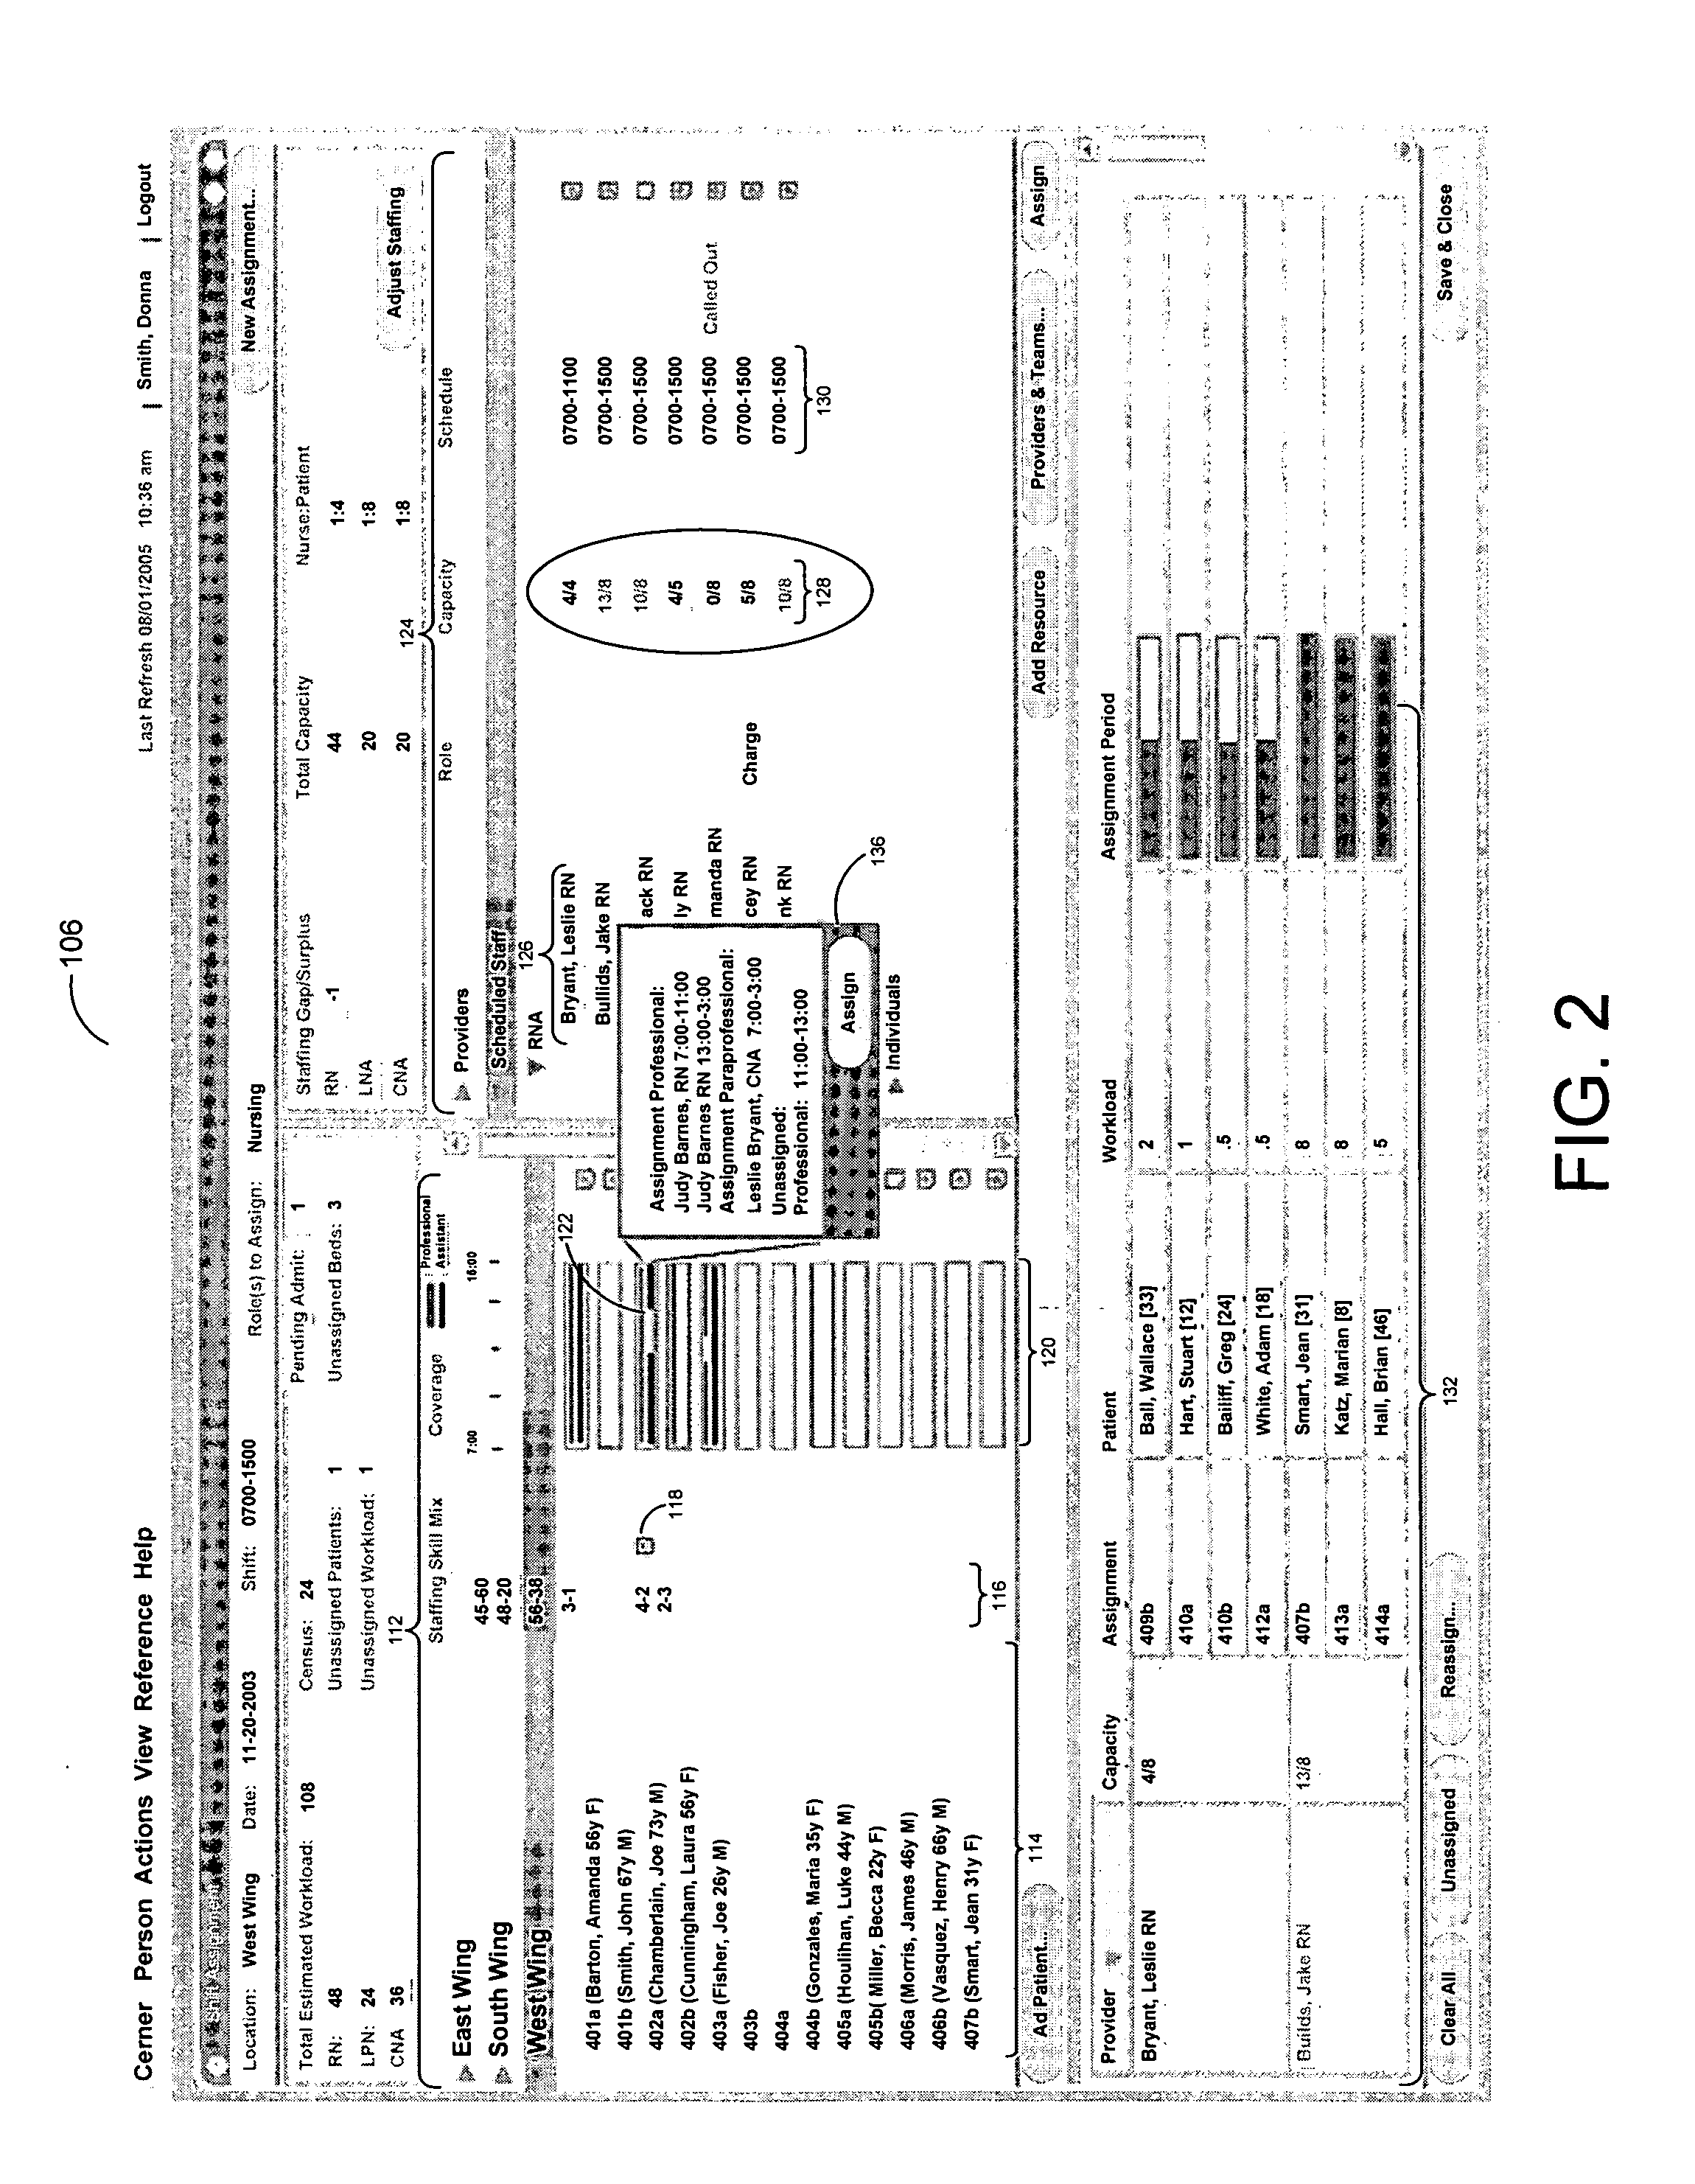 System and method for clinical workforce management interface